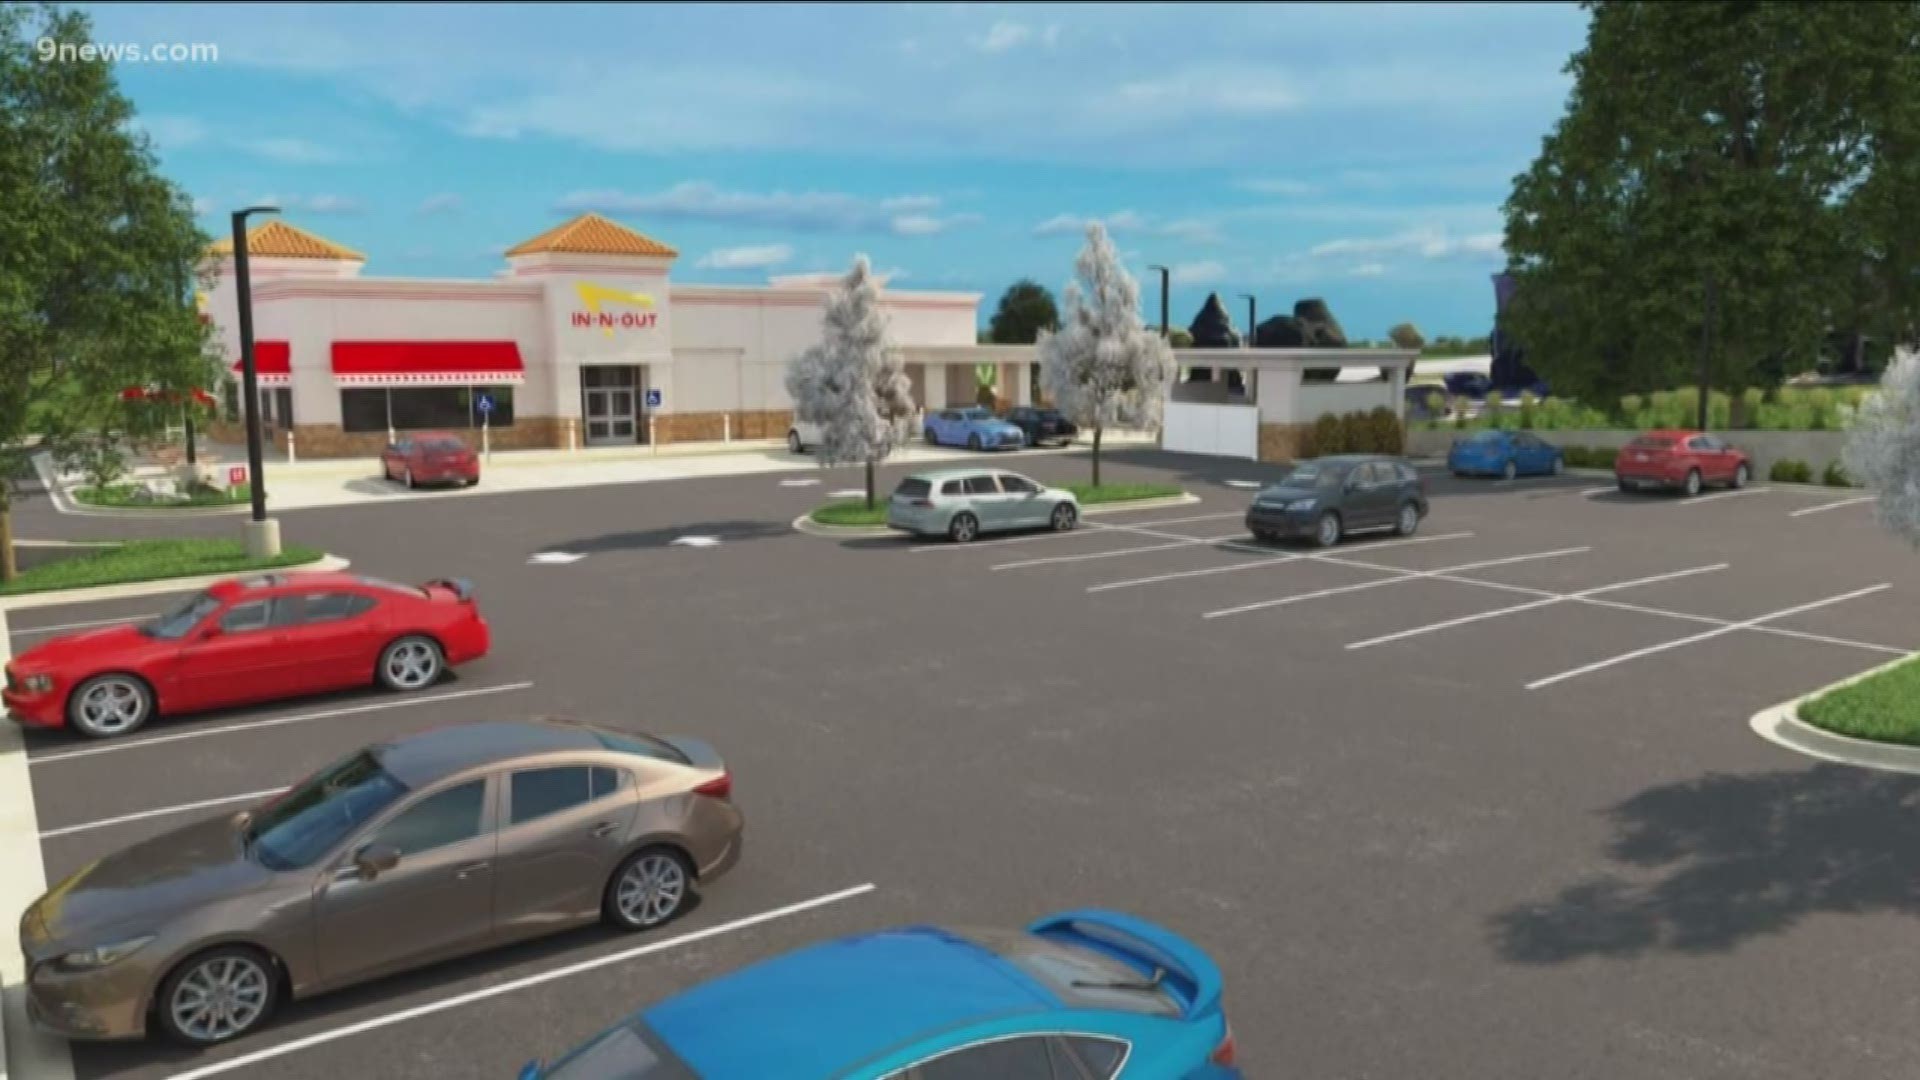 A proposal was submitted with the city for a location on South Wadsworth Boulevard, but plans are in the early stages.